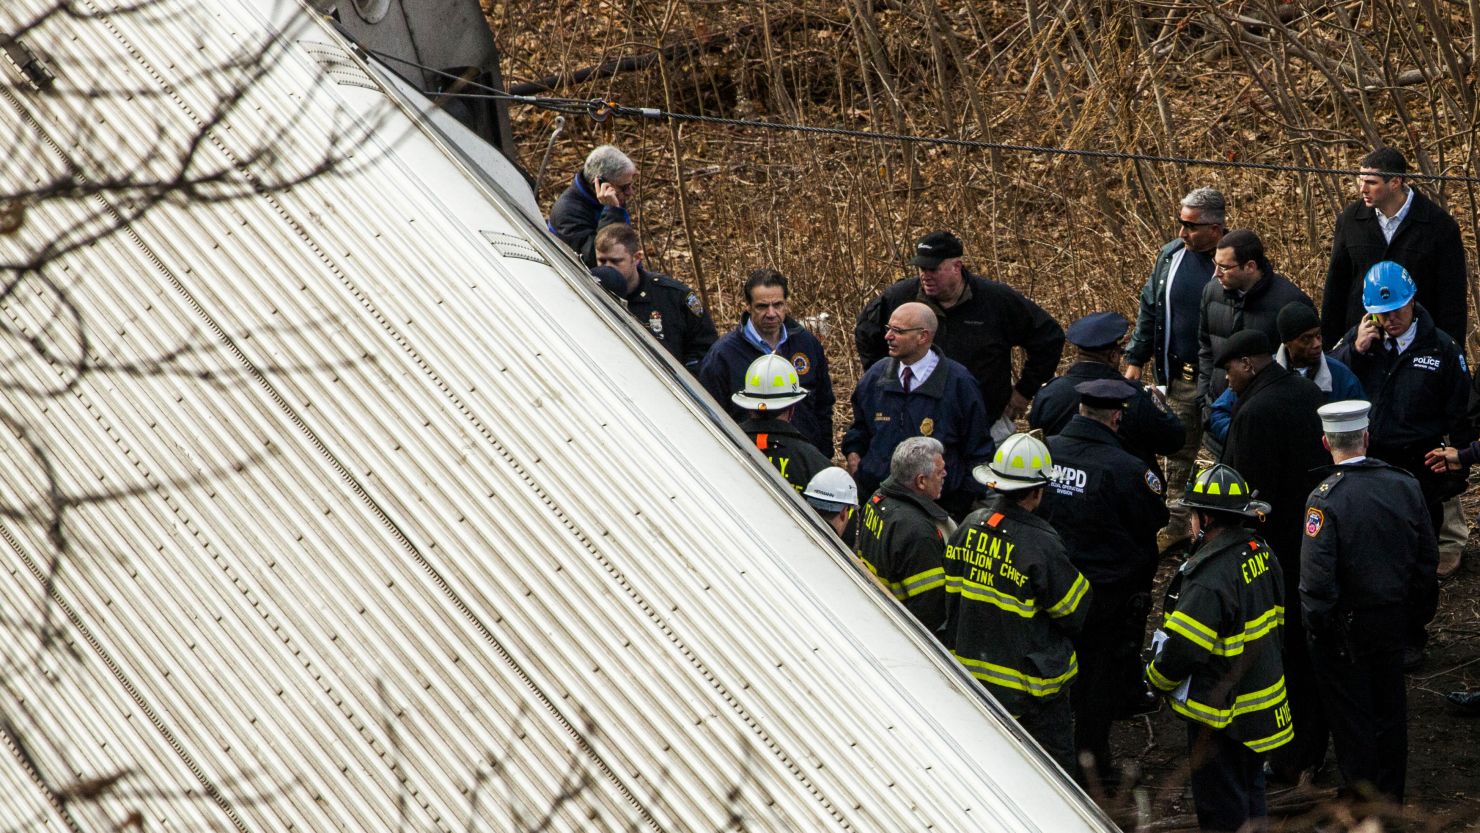 New York Gov. Andrew M. Cuomo, third from left, inspects the damage after a Metro-North train derailed in December.